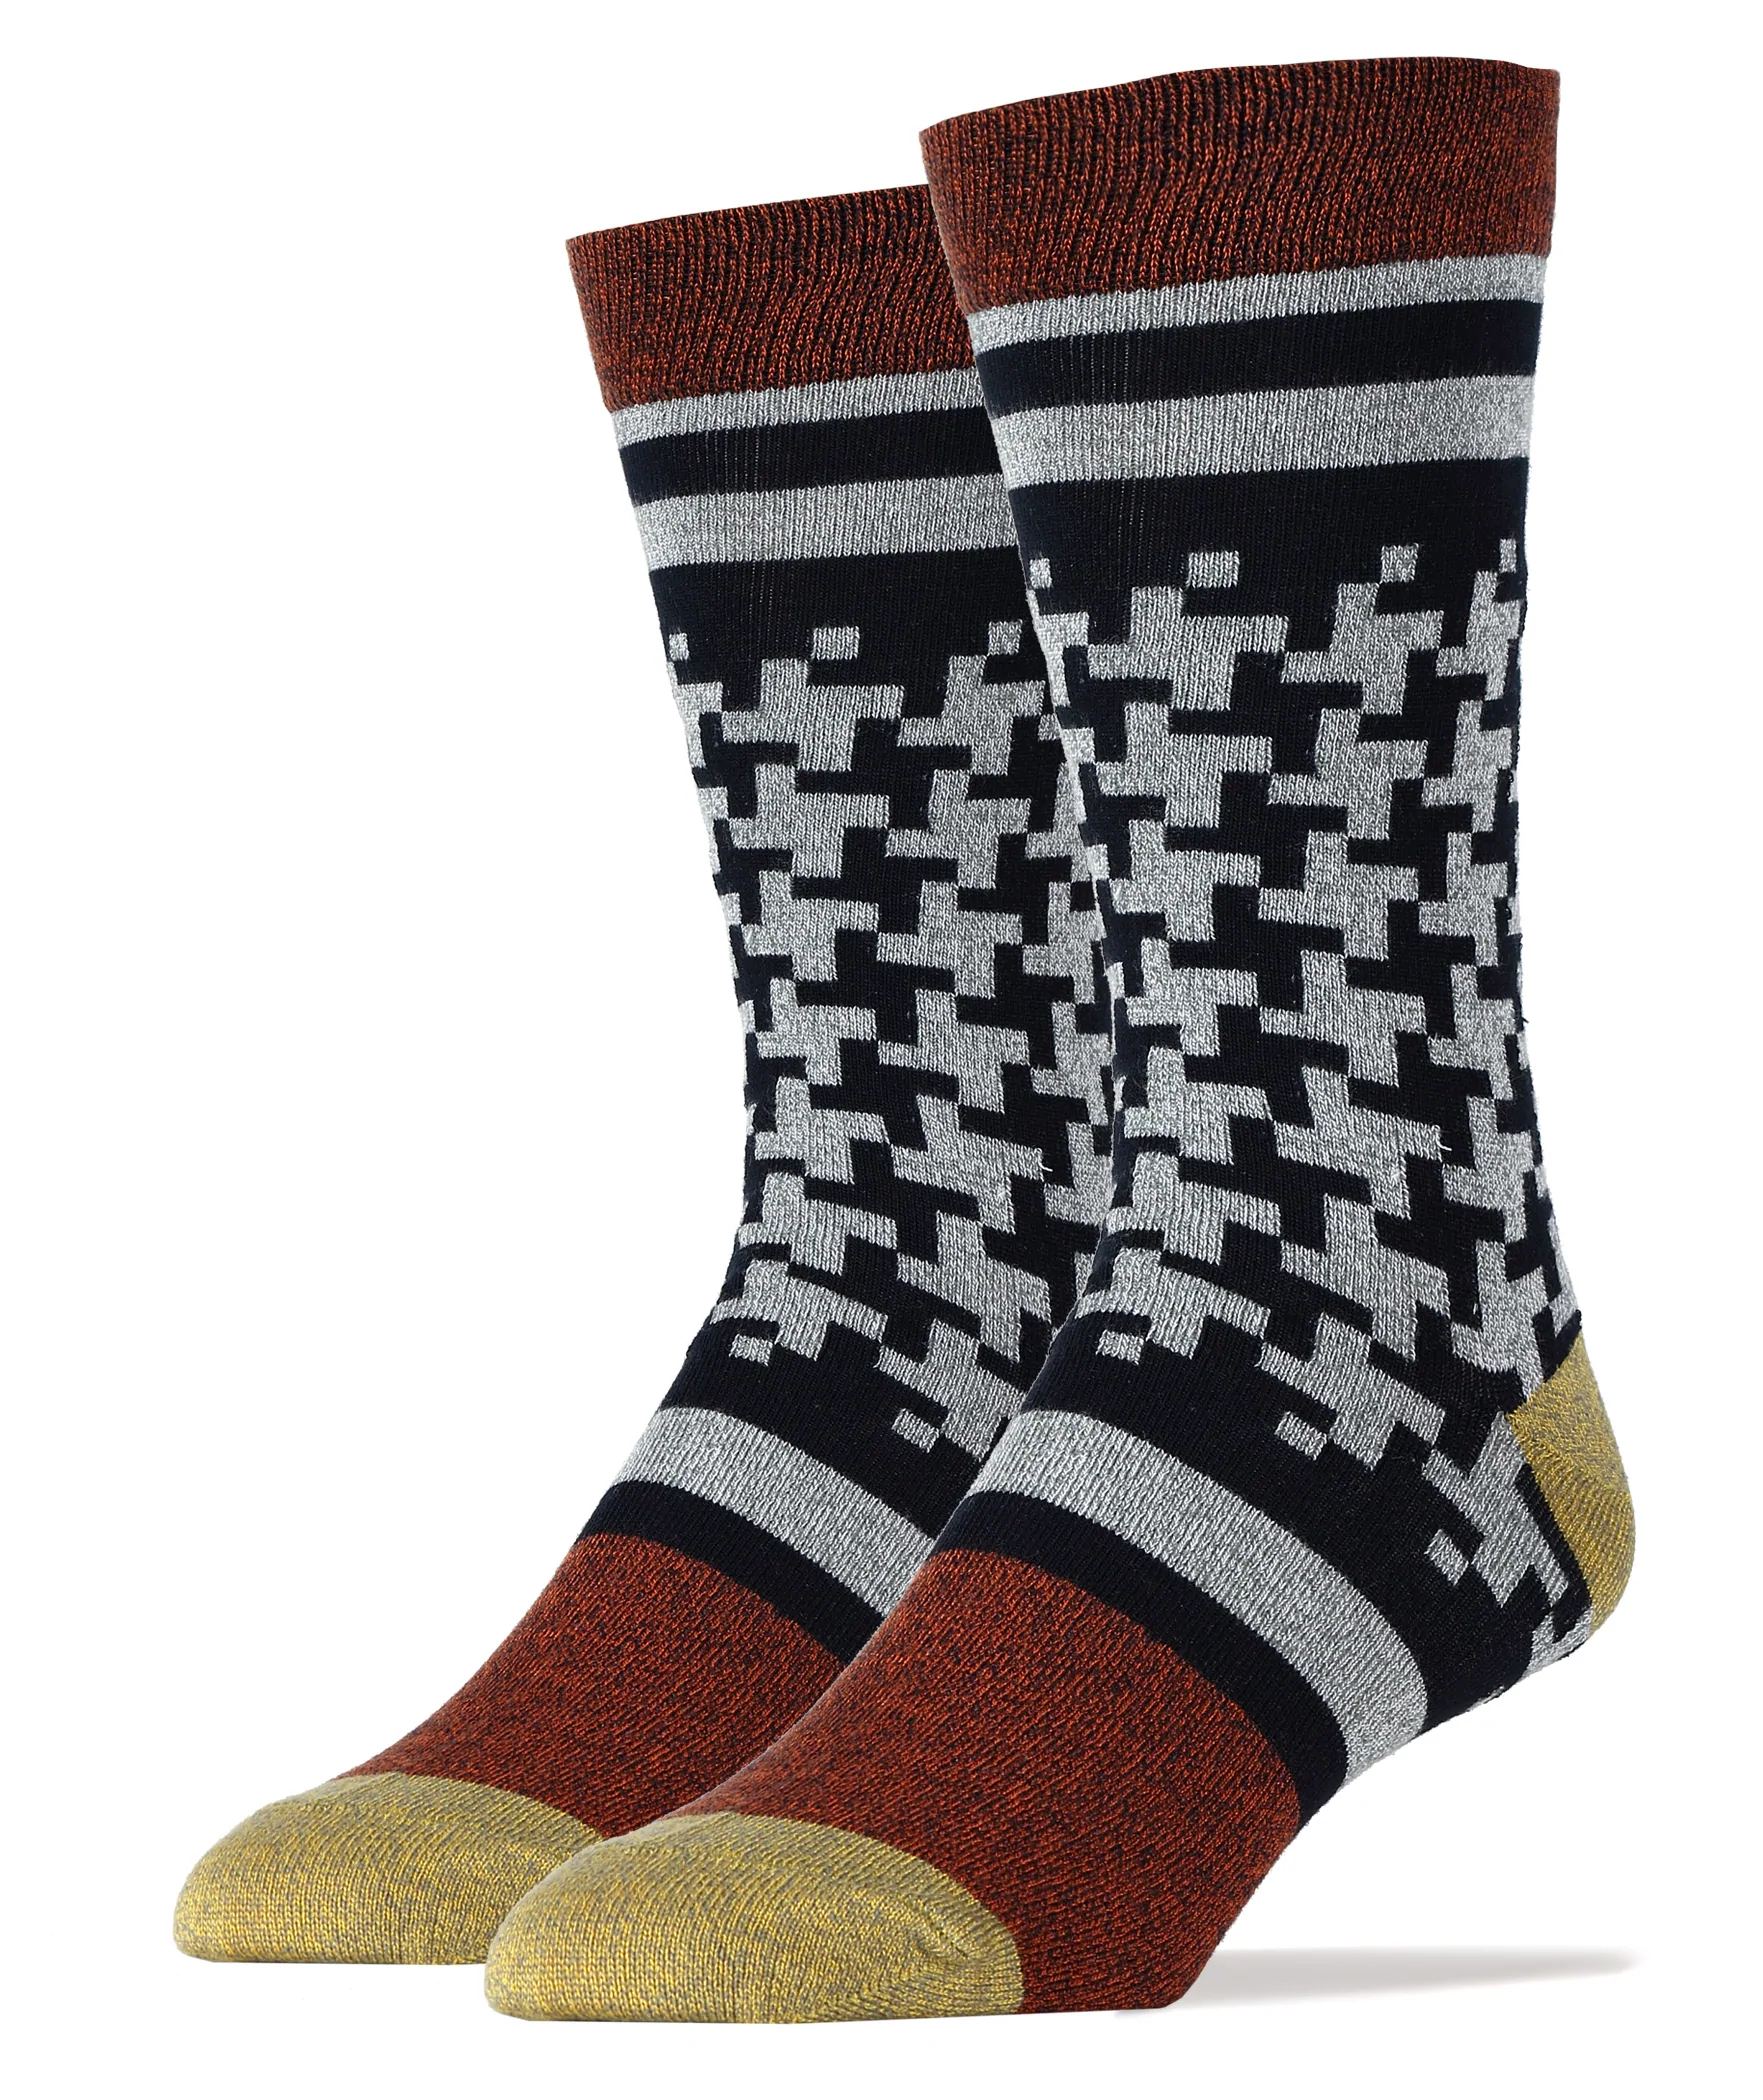 Sock - Large Bamboo Crew: Park Ave